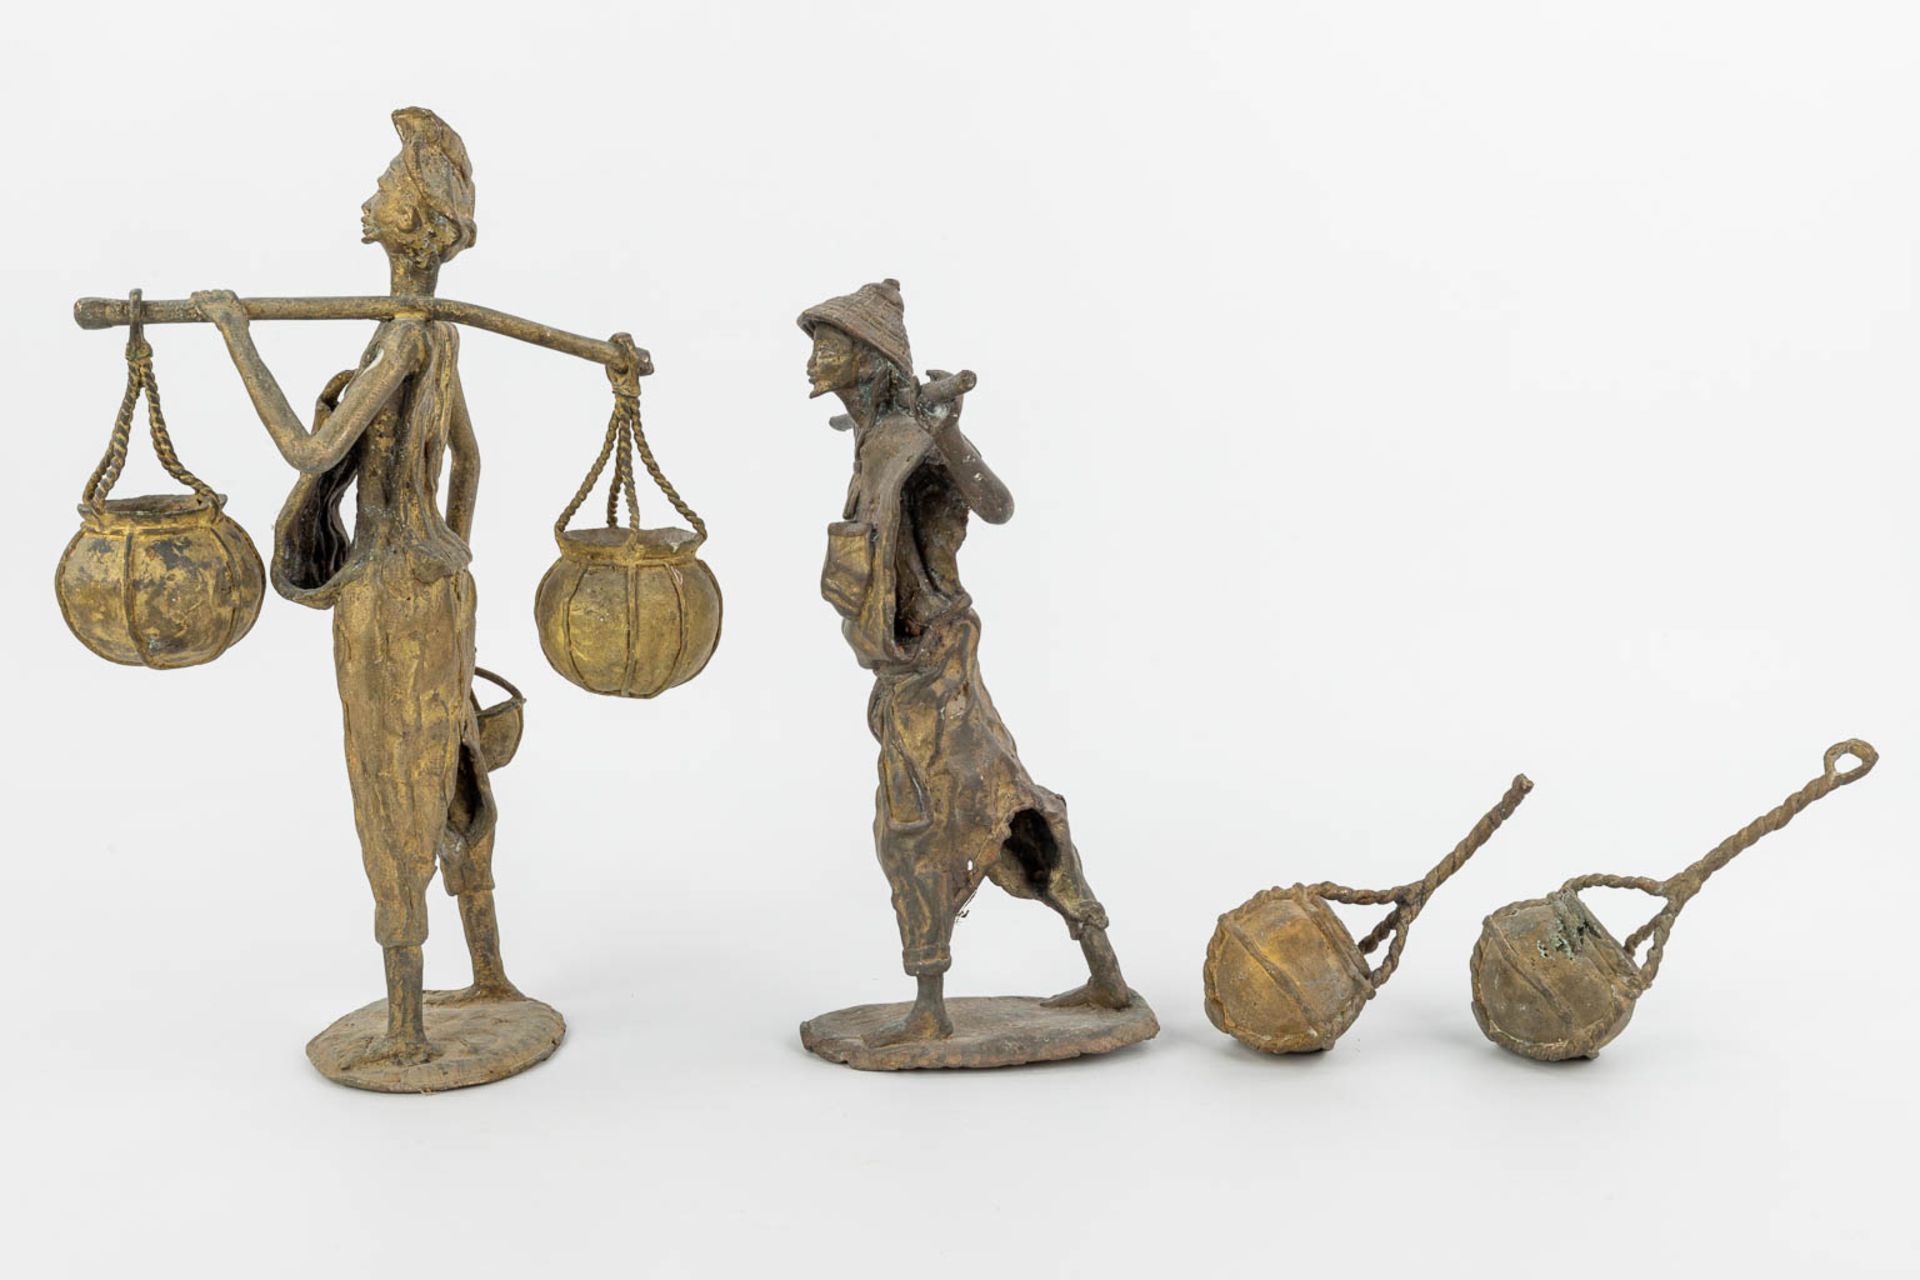 A set of 2 bronze statues of Asian figurines with baskets. (H:36cm) - Image 5 of 11